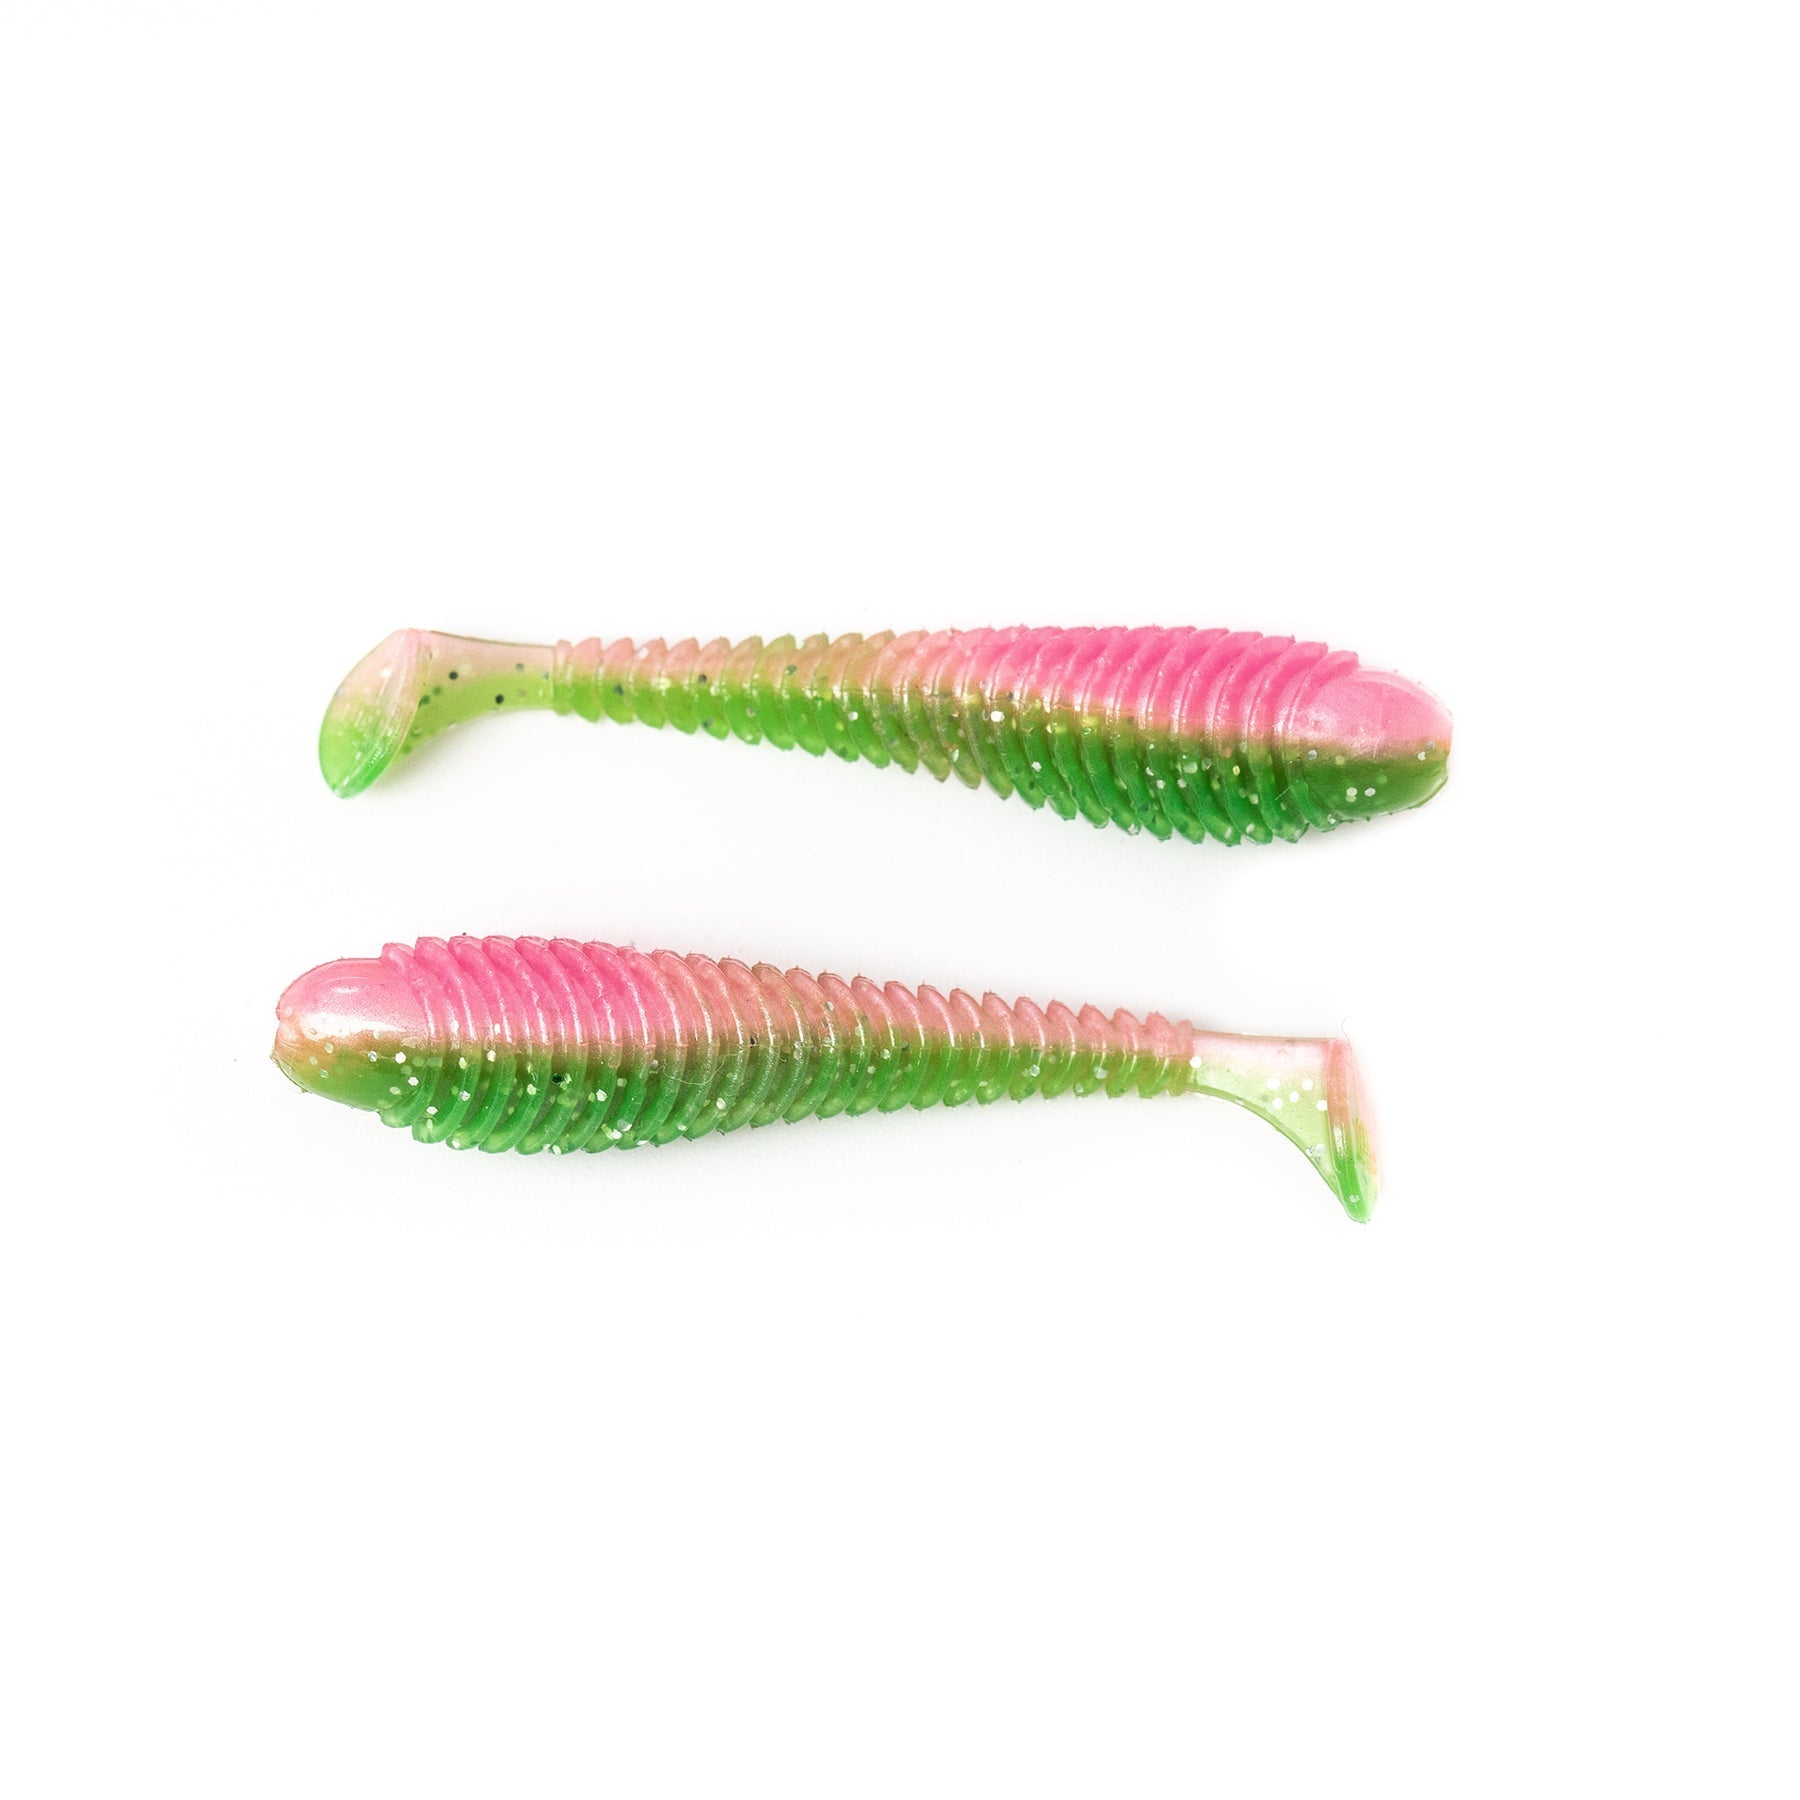 Googan Squad Snacky Swimmer - Hamilton Bait and Tackle